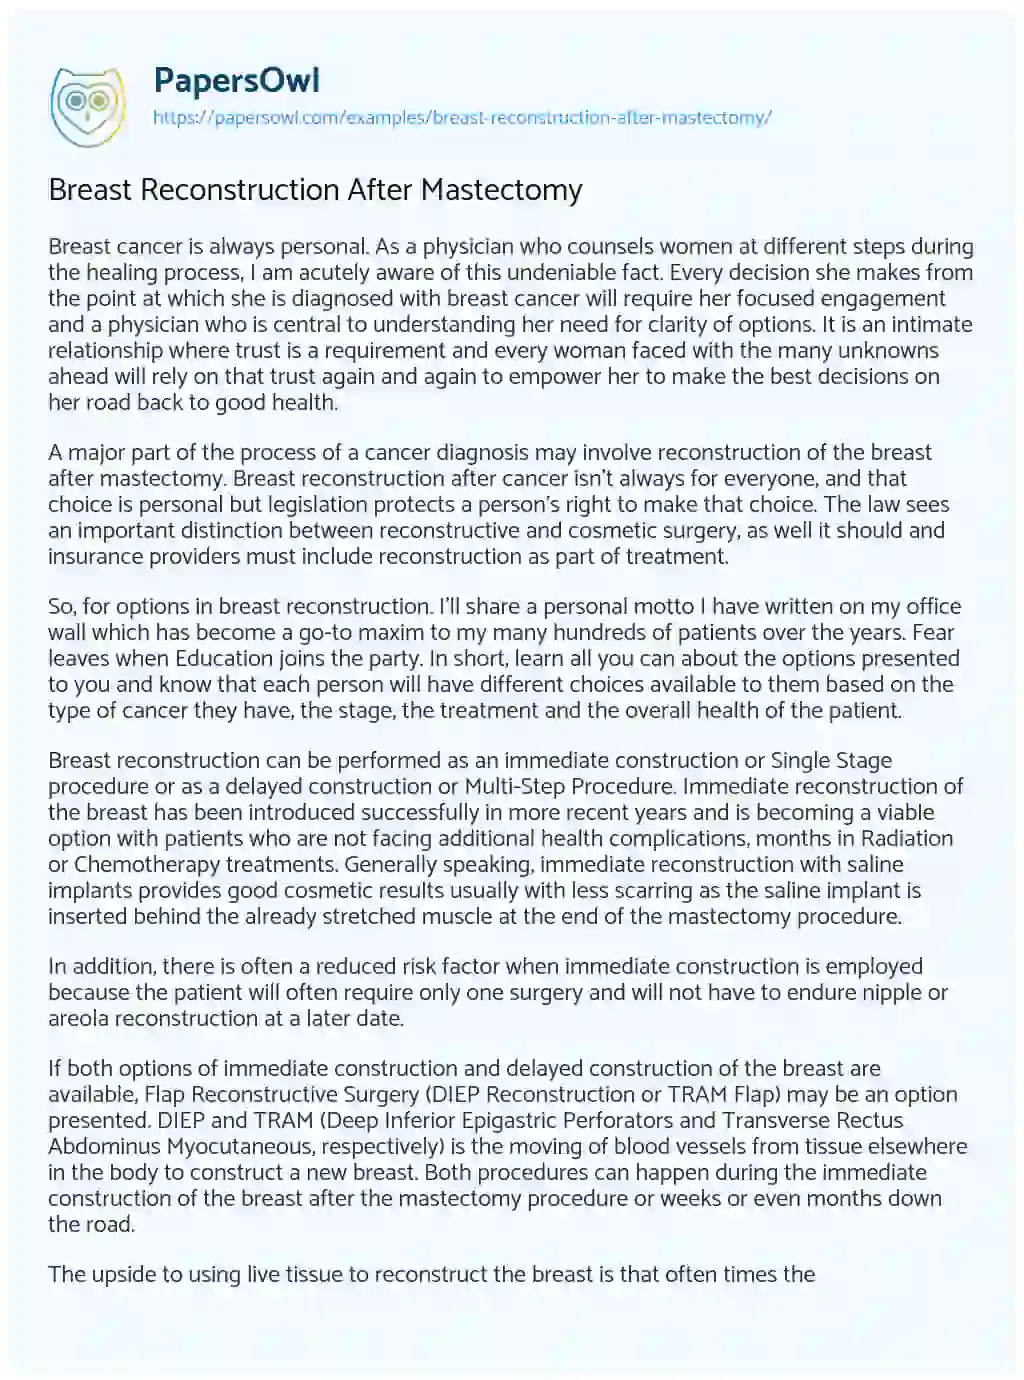 Essay on Breast Reconstruction after Mastectomy